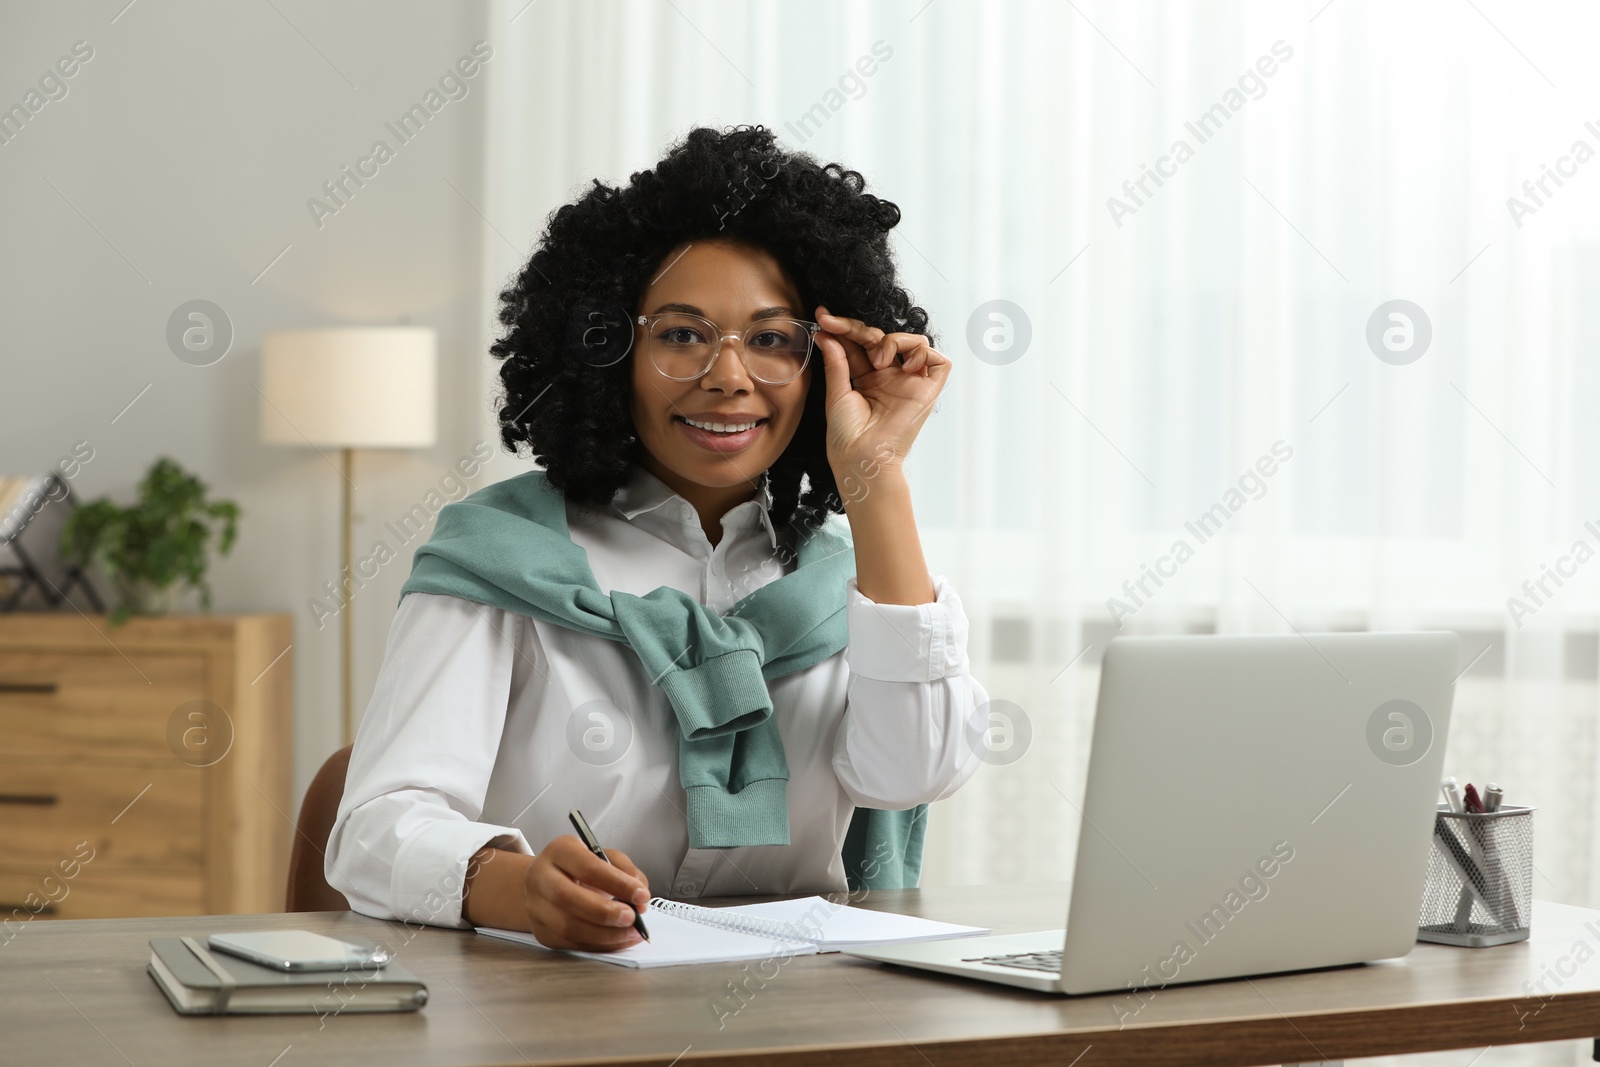 Photo of Happy young woman using laptop at wooden desk indoors